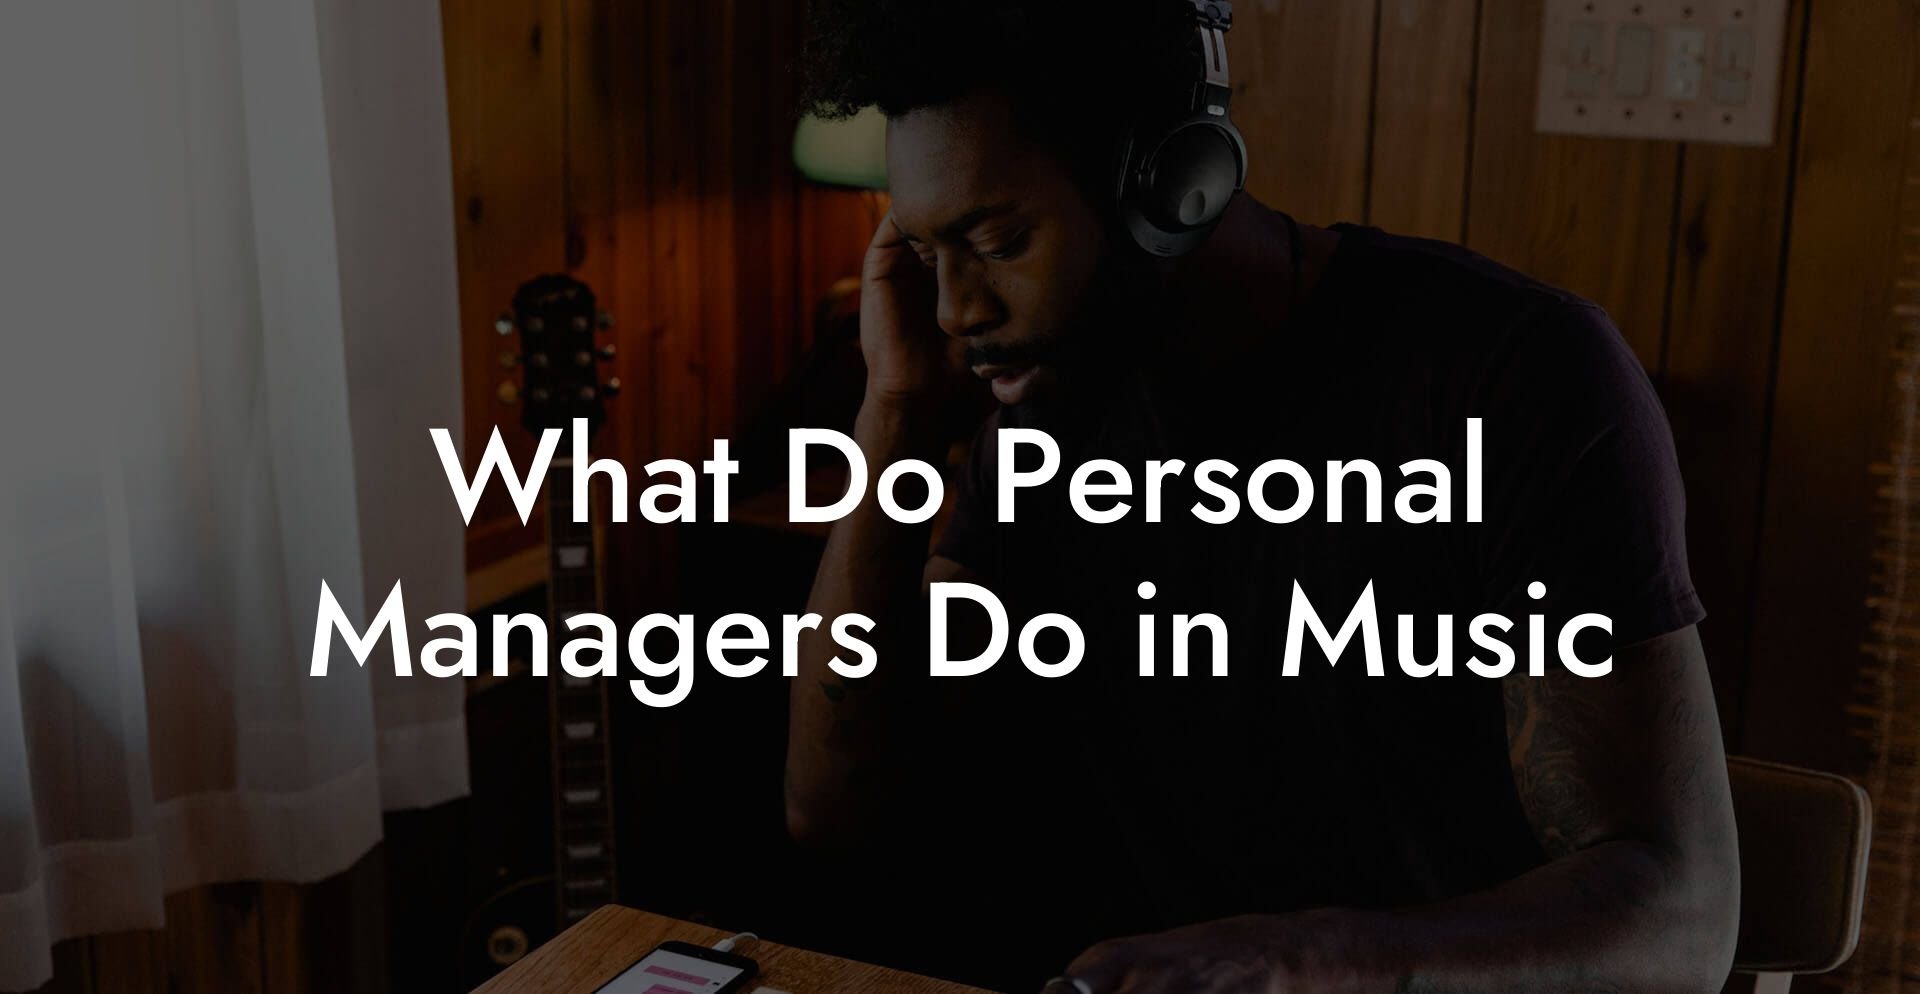 What Do Personal Managers Do in Music